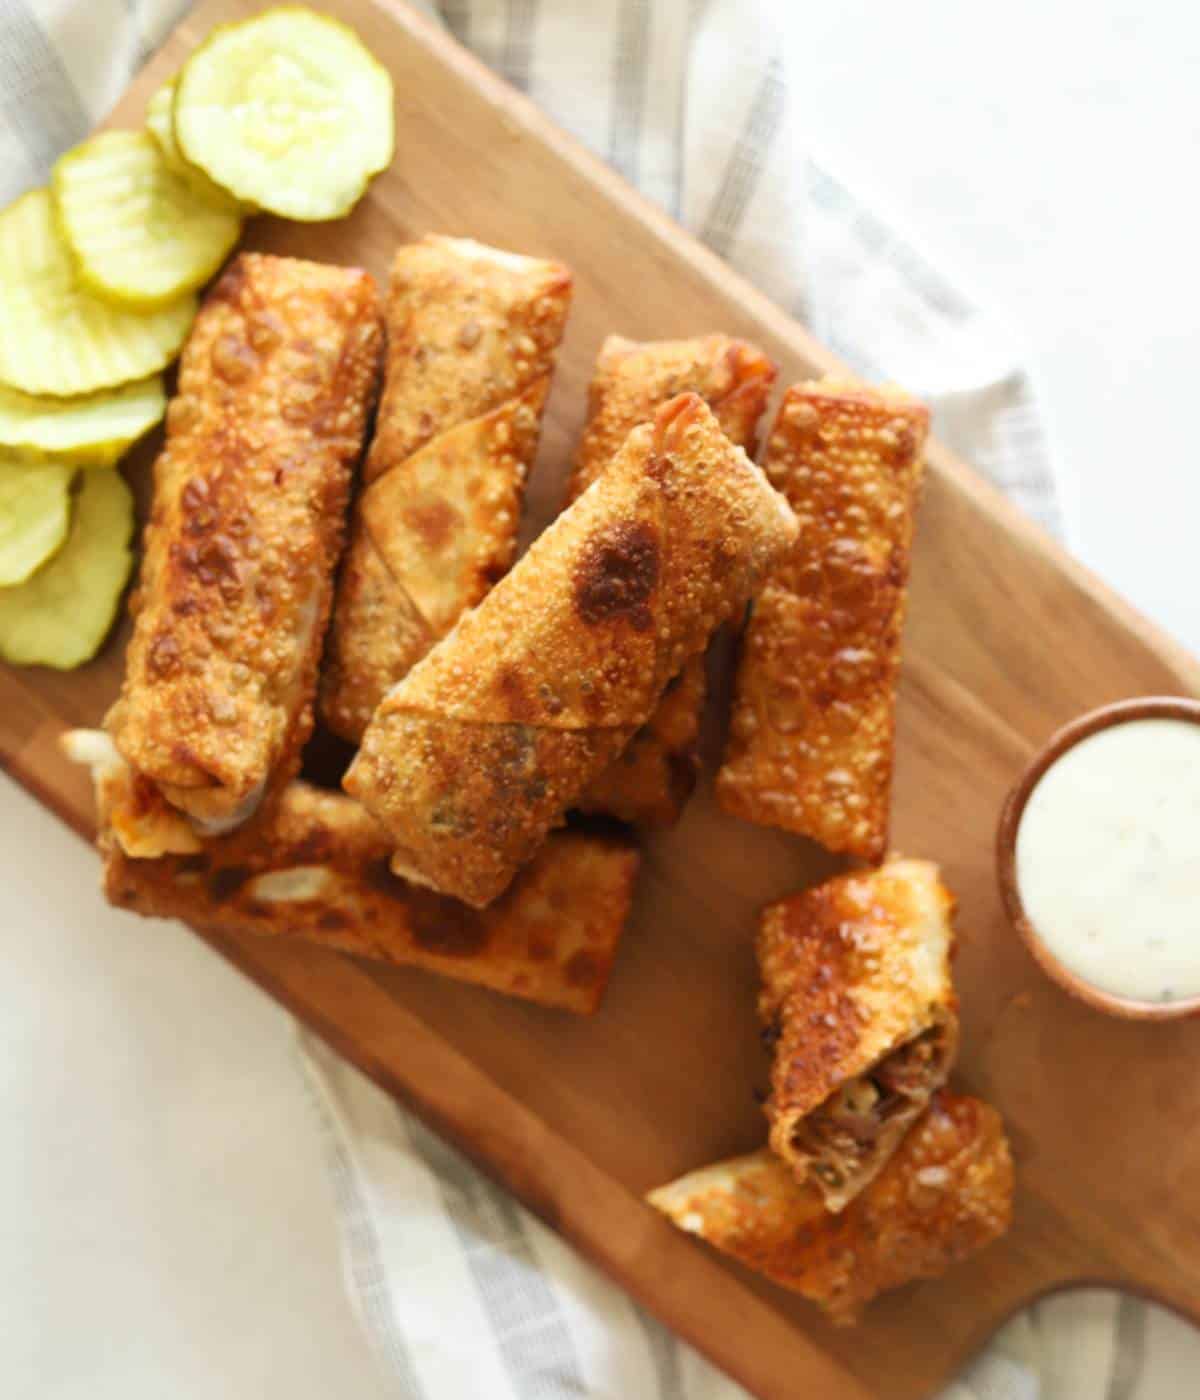 Egg rolls on wooden platter with ranch and pickles.